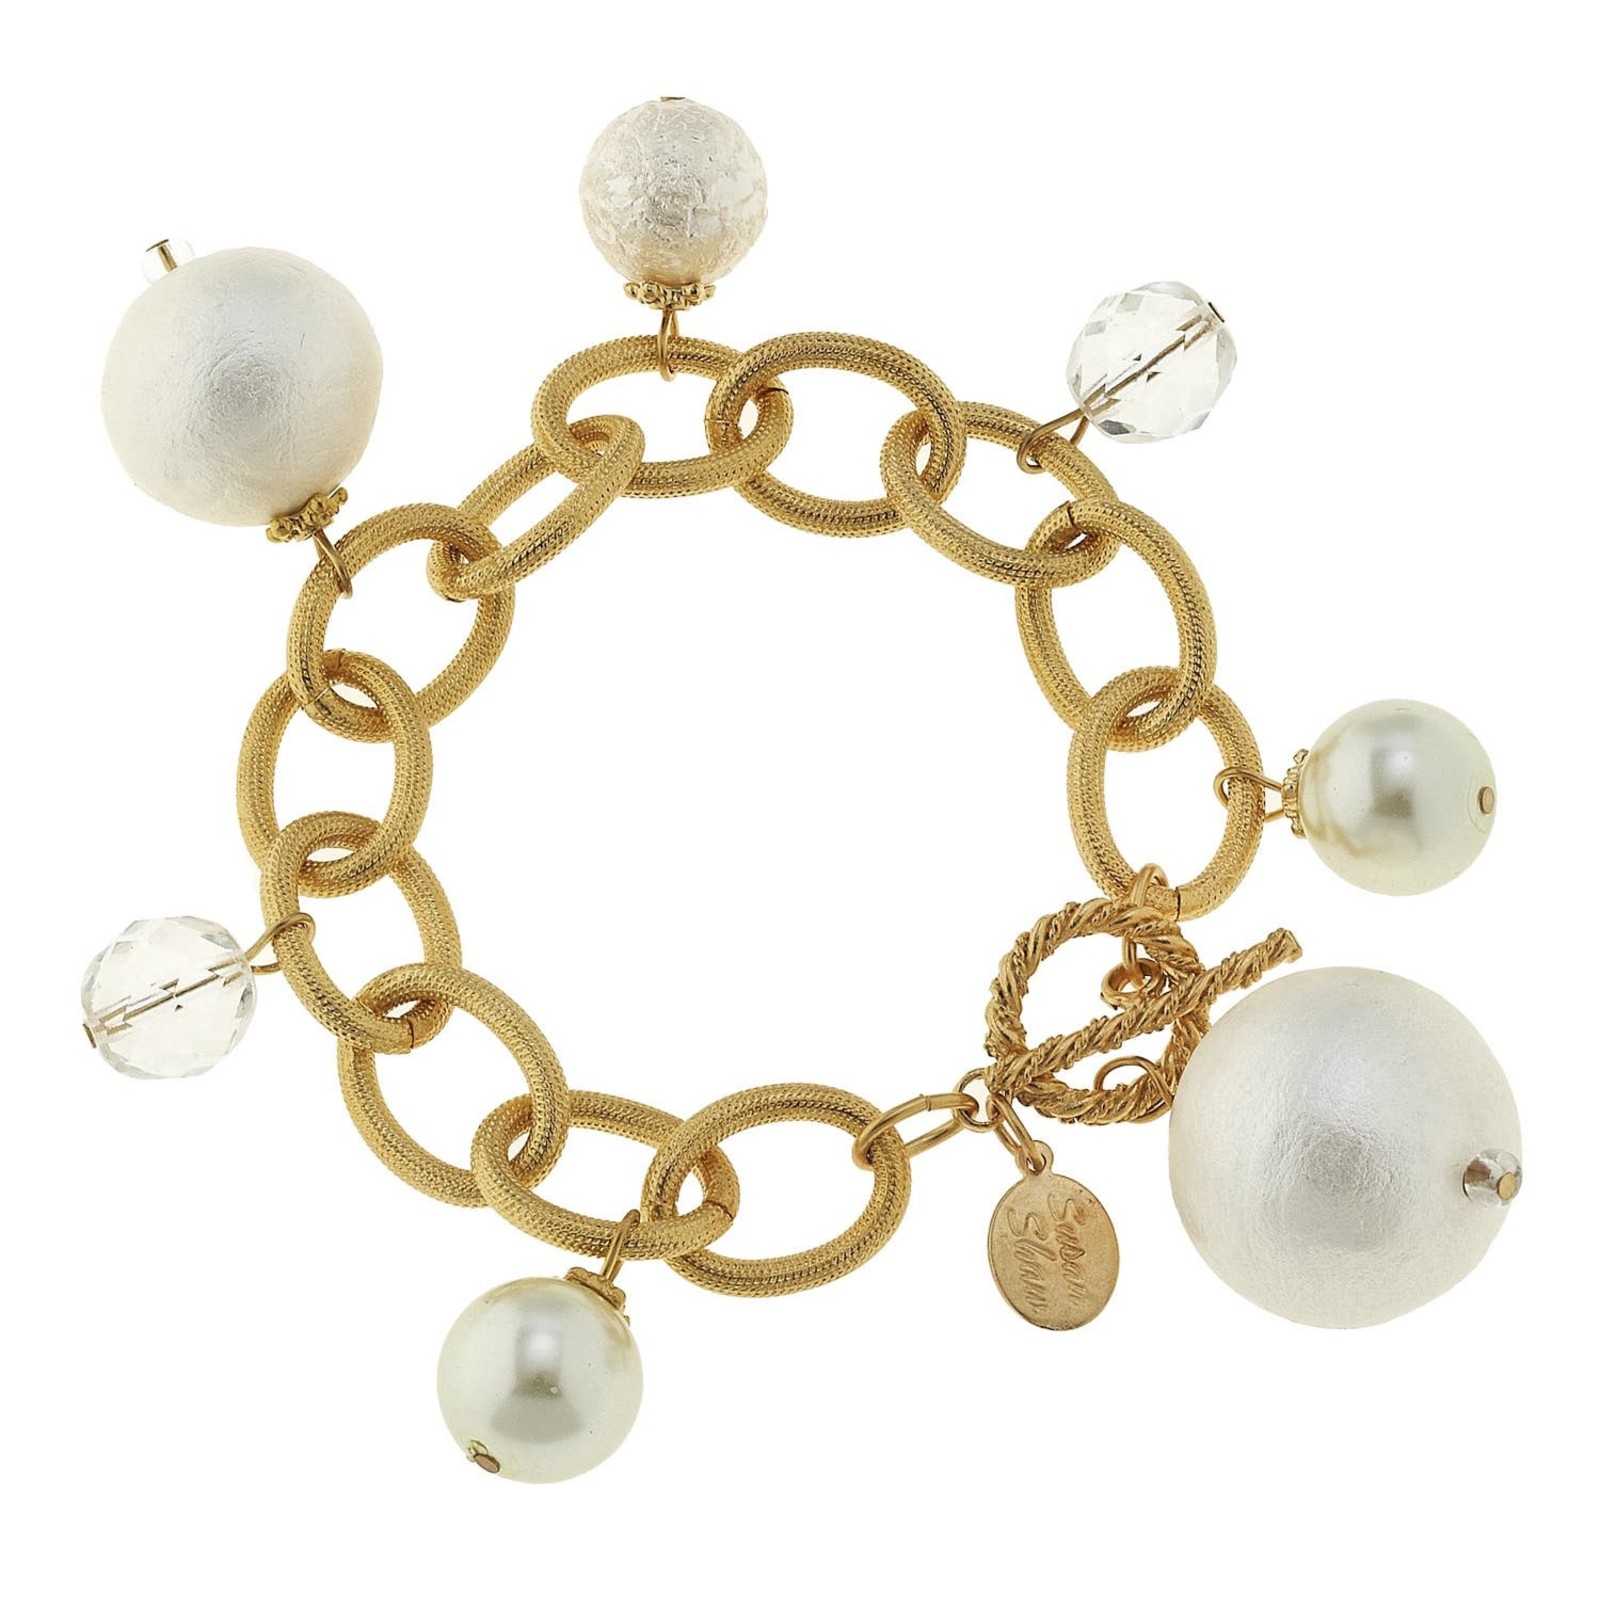 Susan Shaw Gold with clear and crystal balls  Bracelet   2822w loading=